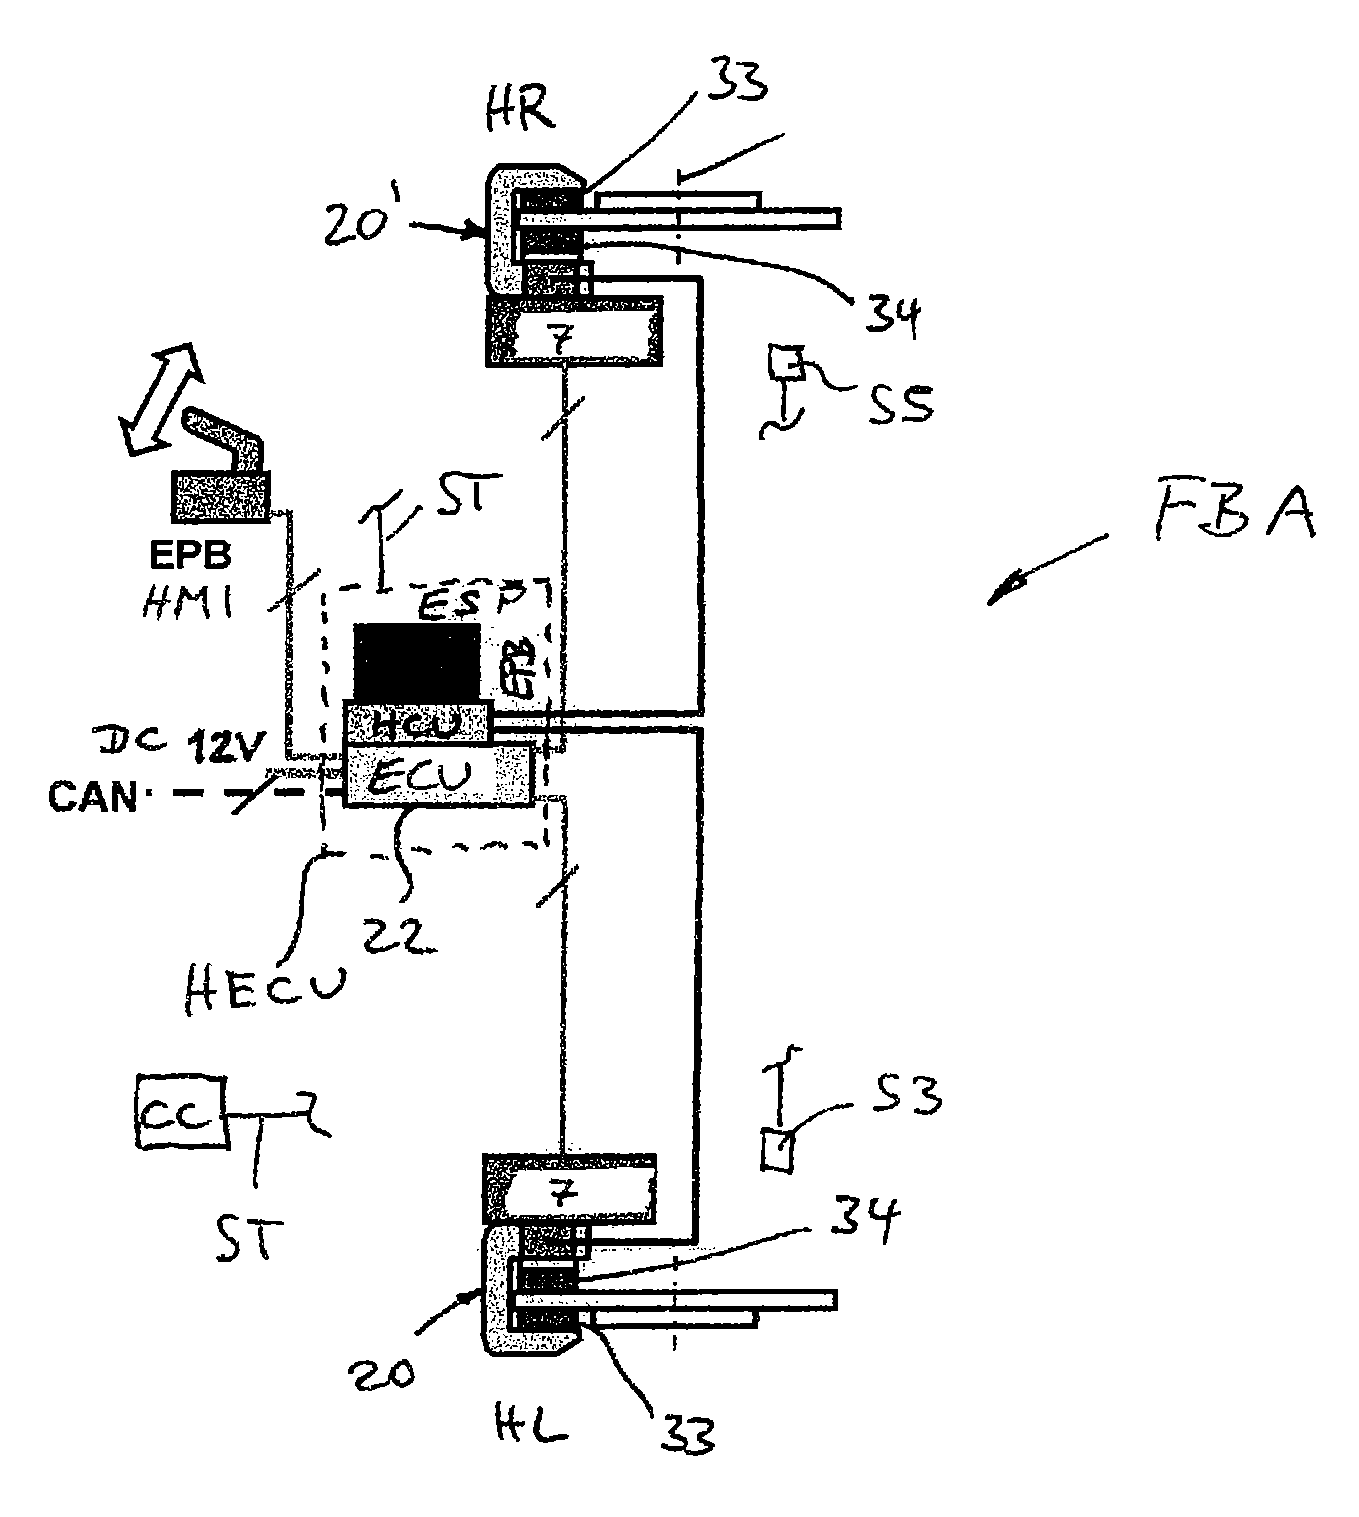 Motor vehicle braking system having a hydraulically actuated service braking system and an electromechanically actuated braking system